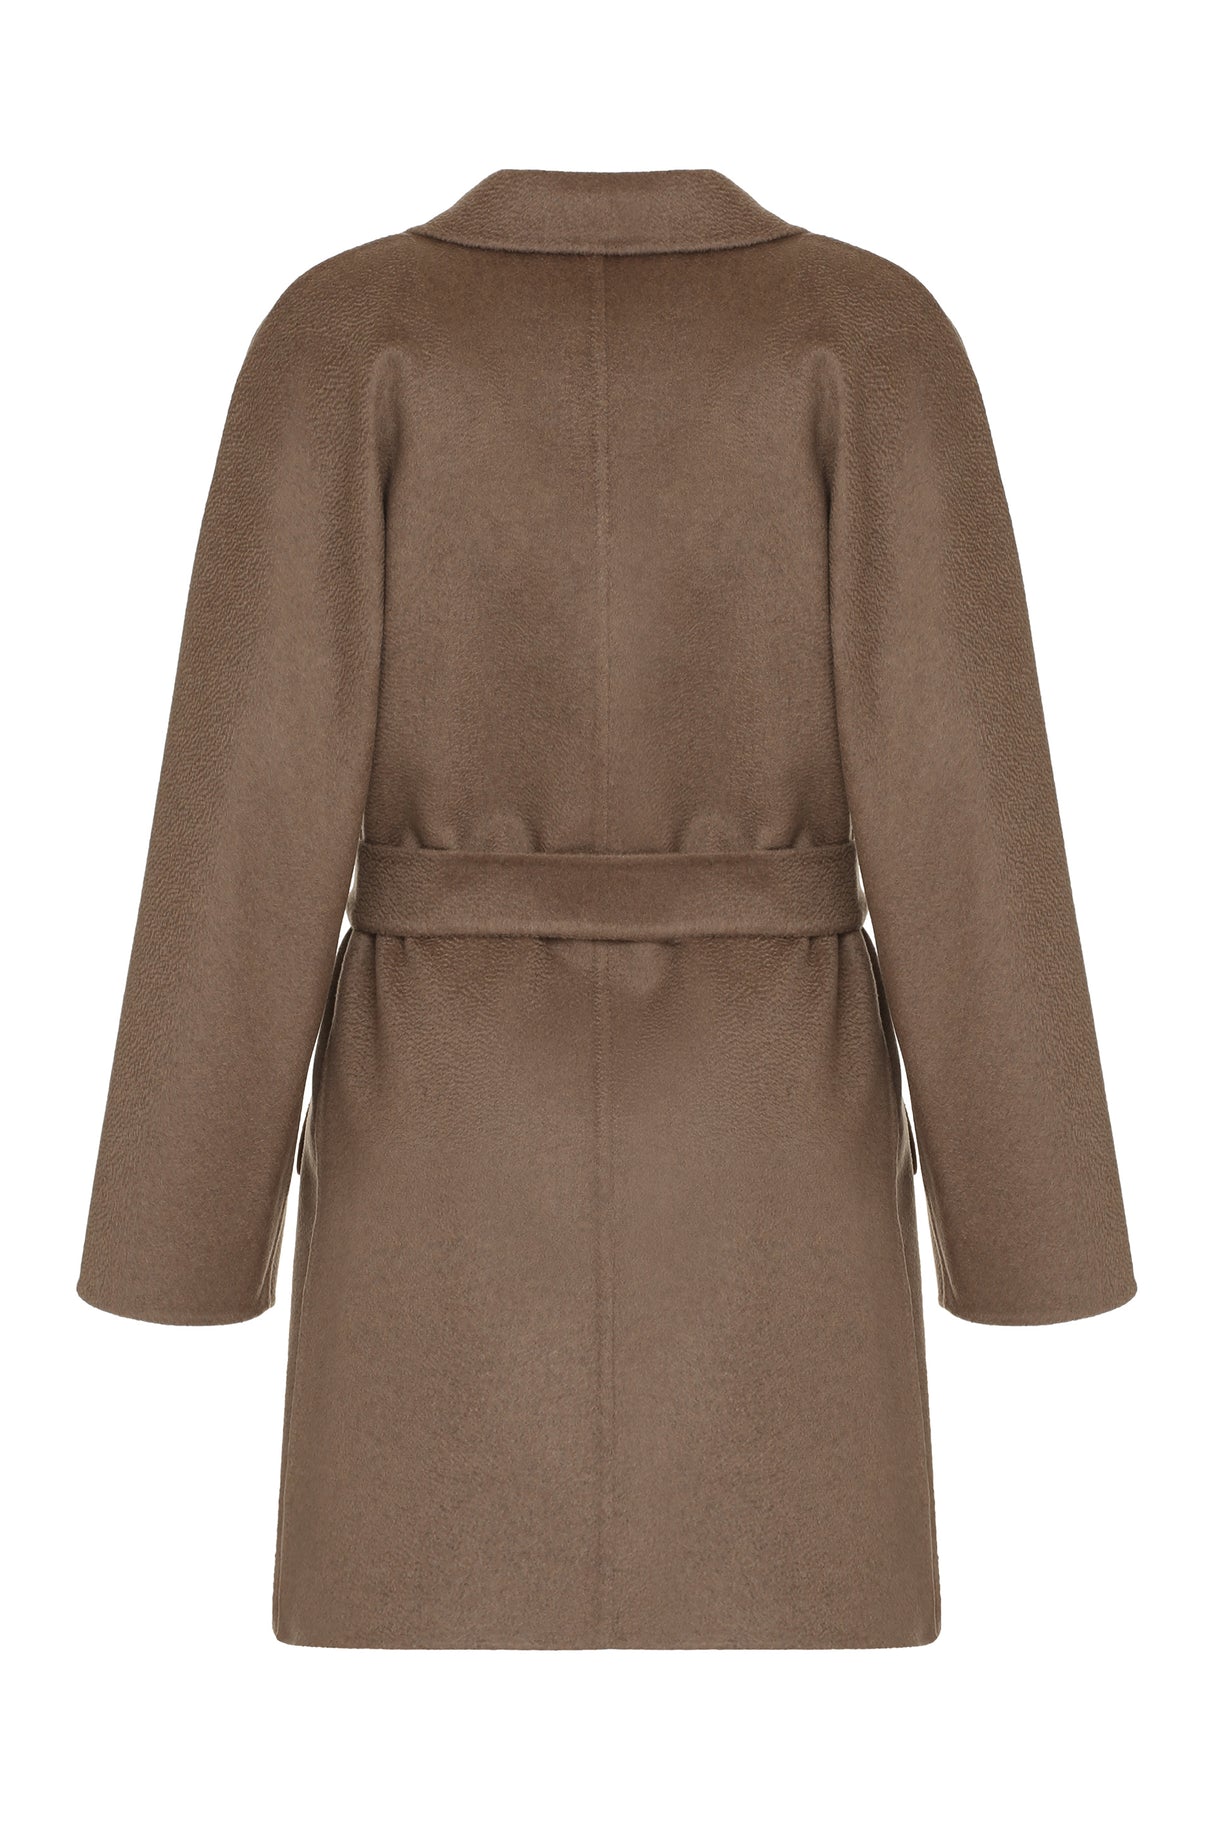 MAX MARA Taupe Cashmere Jacket with Lapel Collar and Coordinated Waist Belt